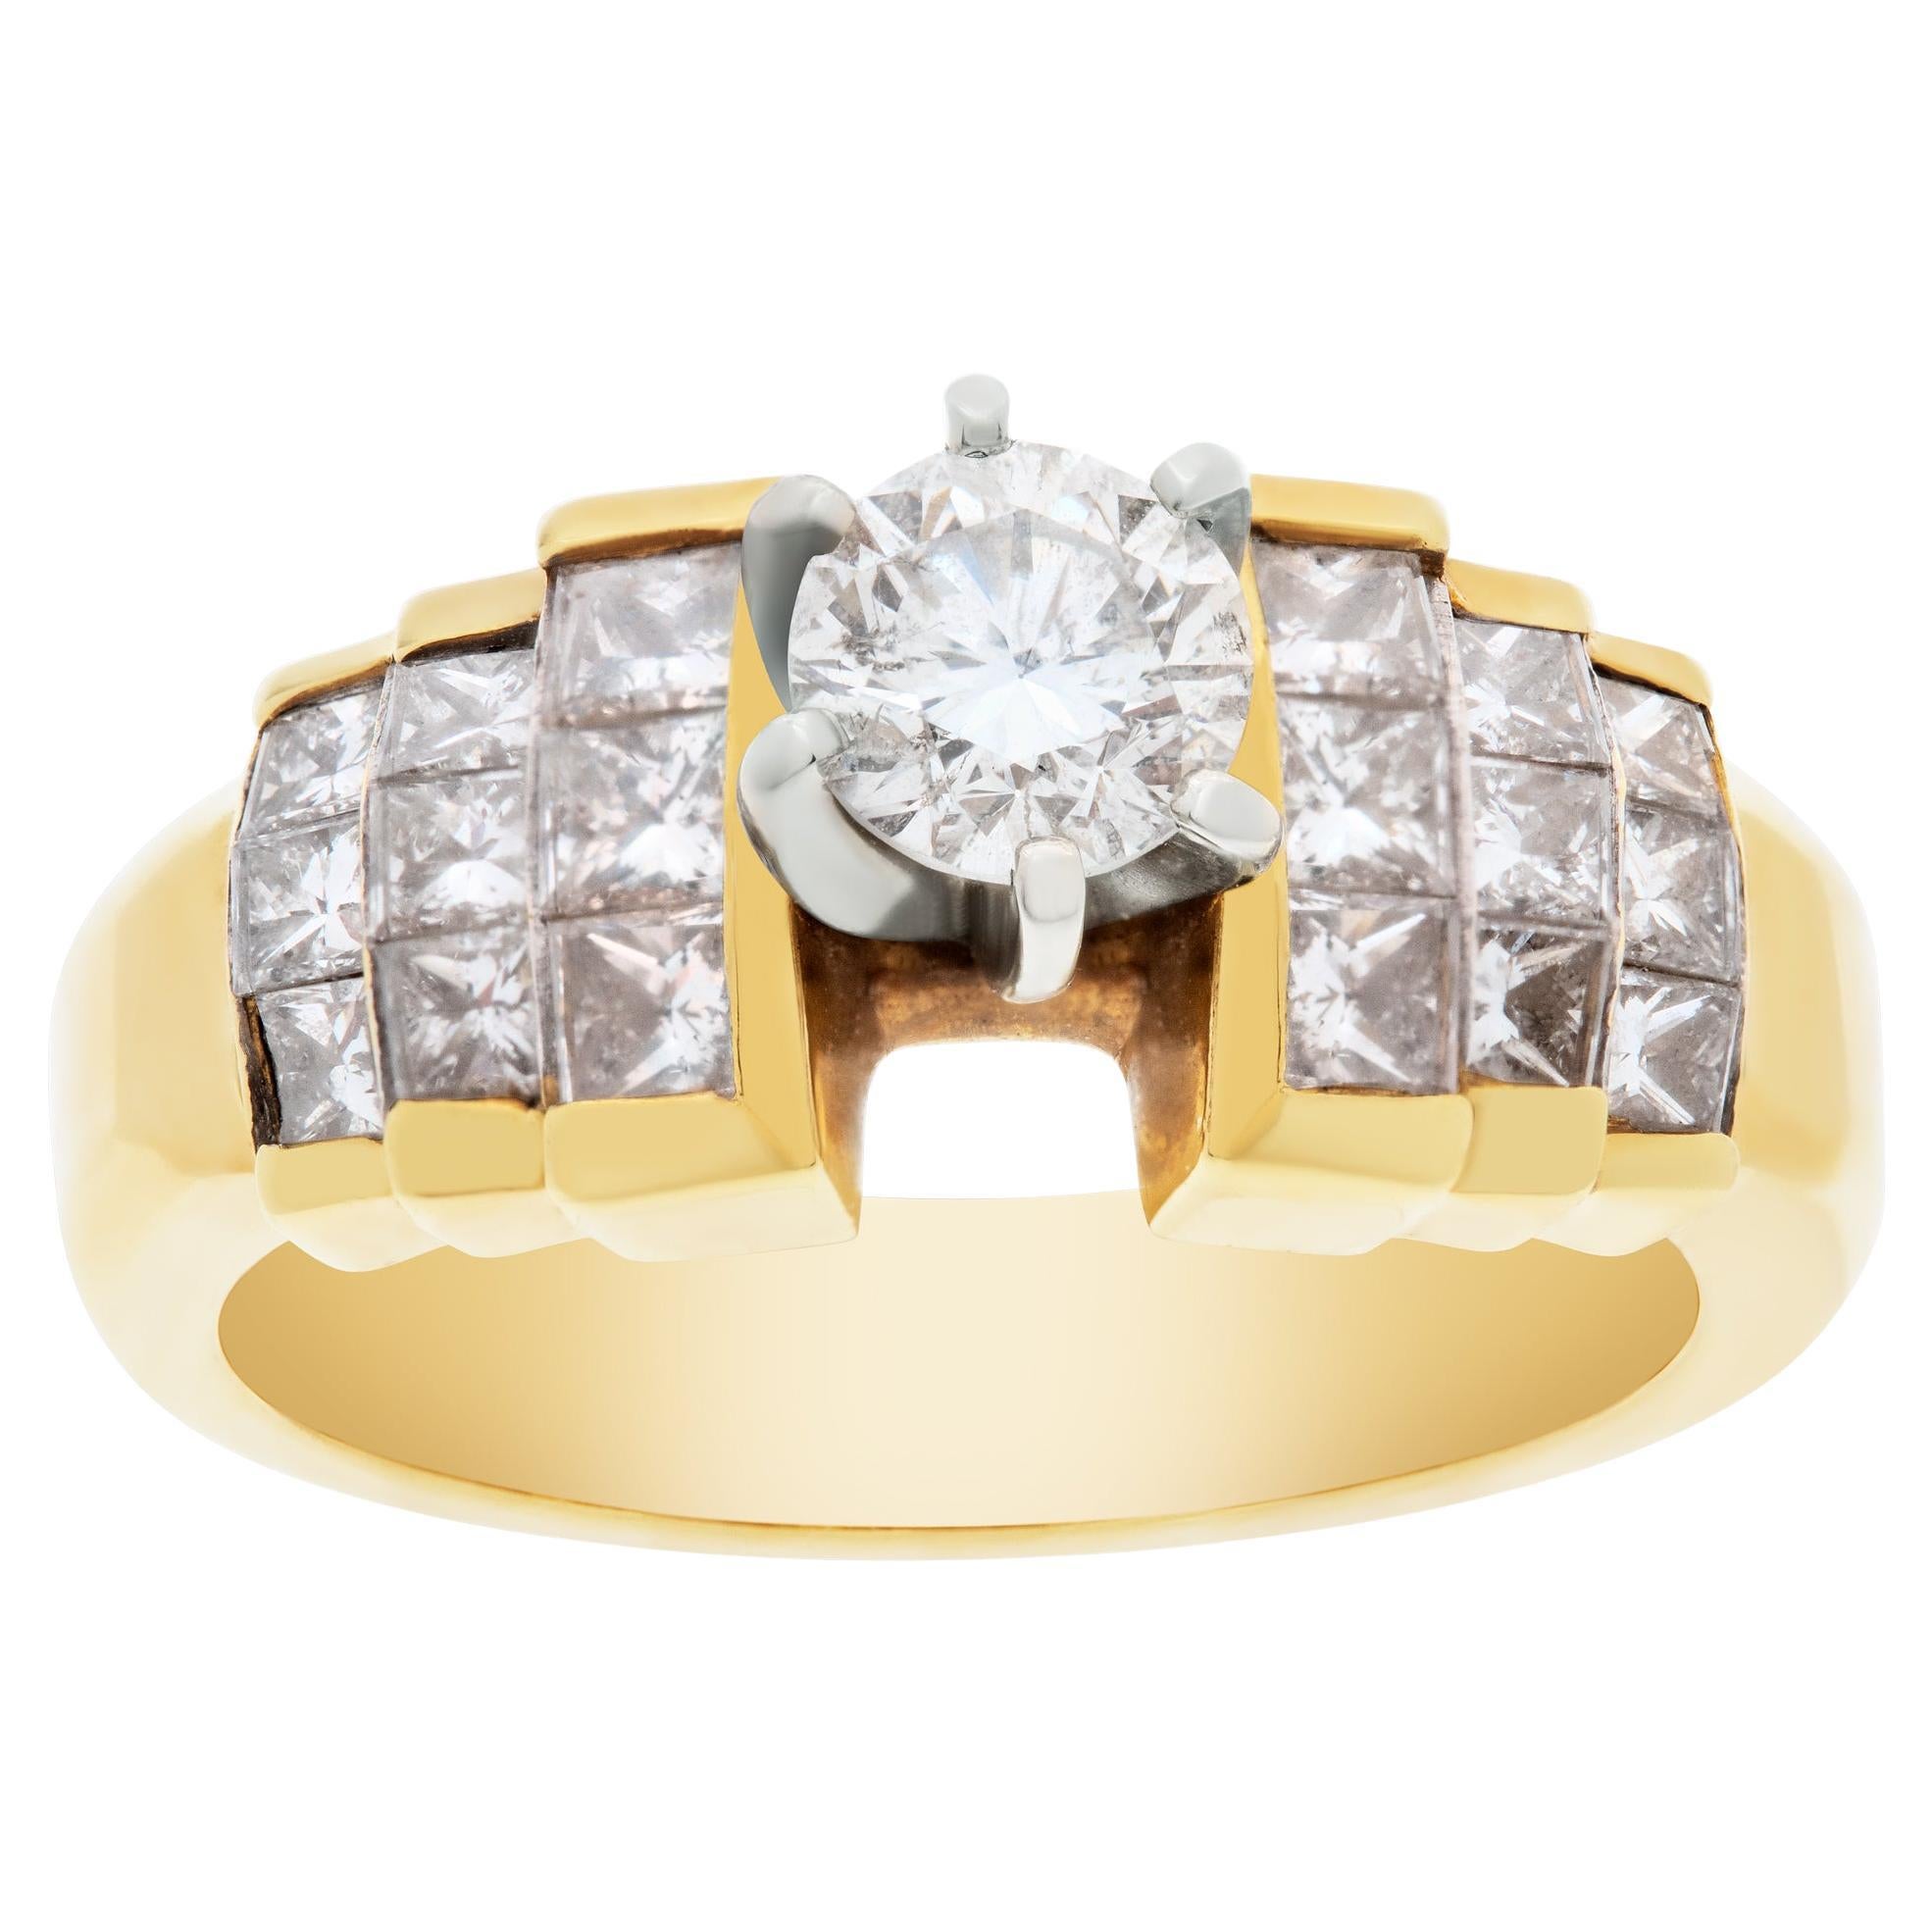 Diamond Engagement Ring in 18k Yellow Gold with 0.45 Carat Center Diamond